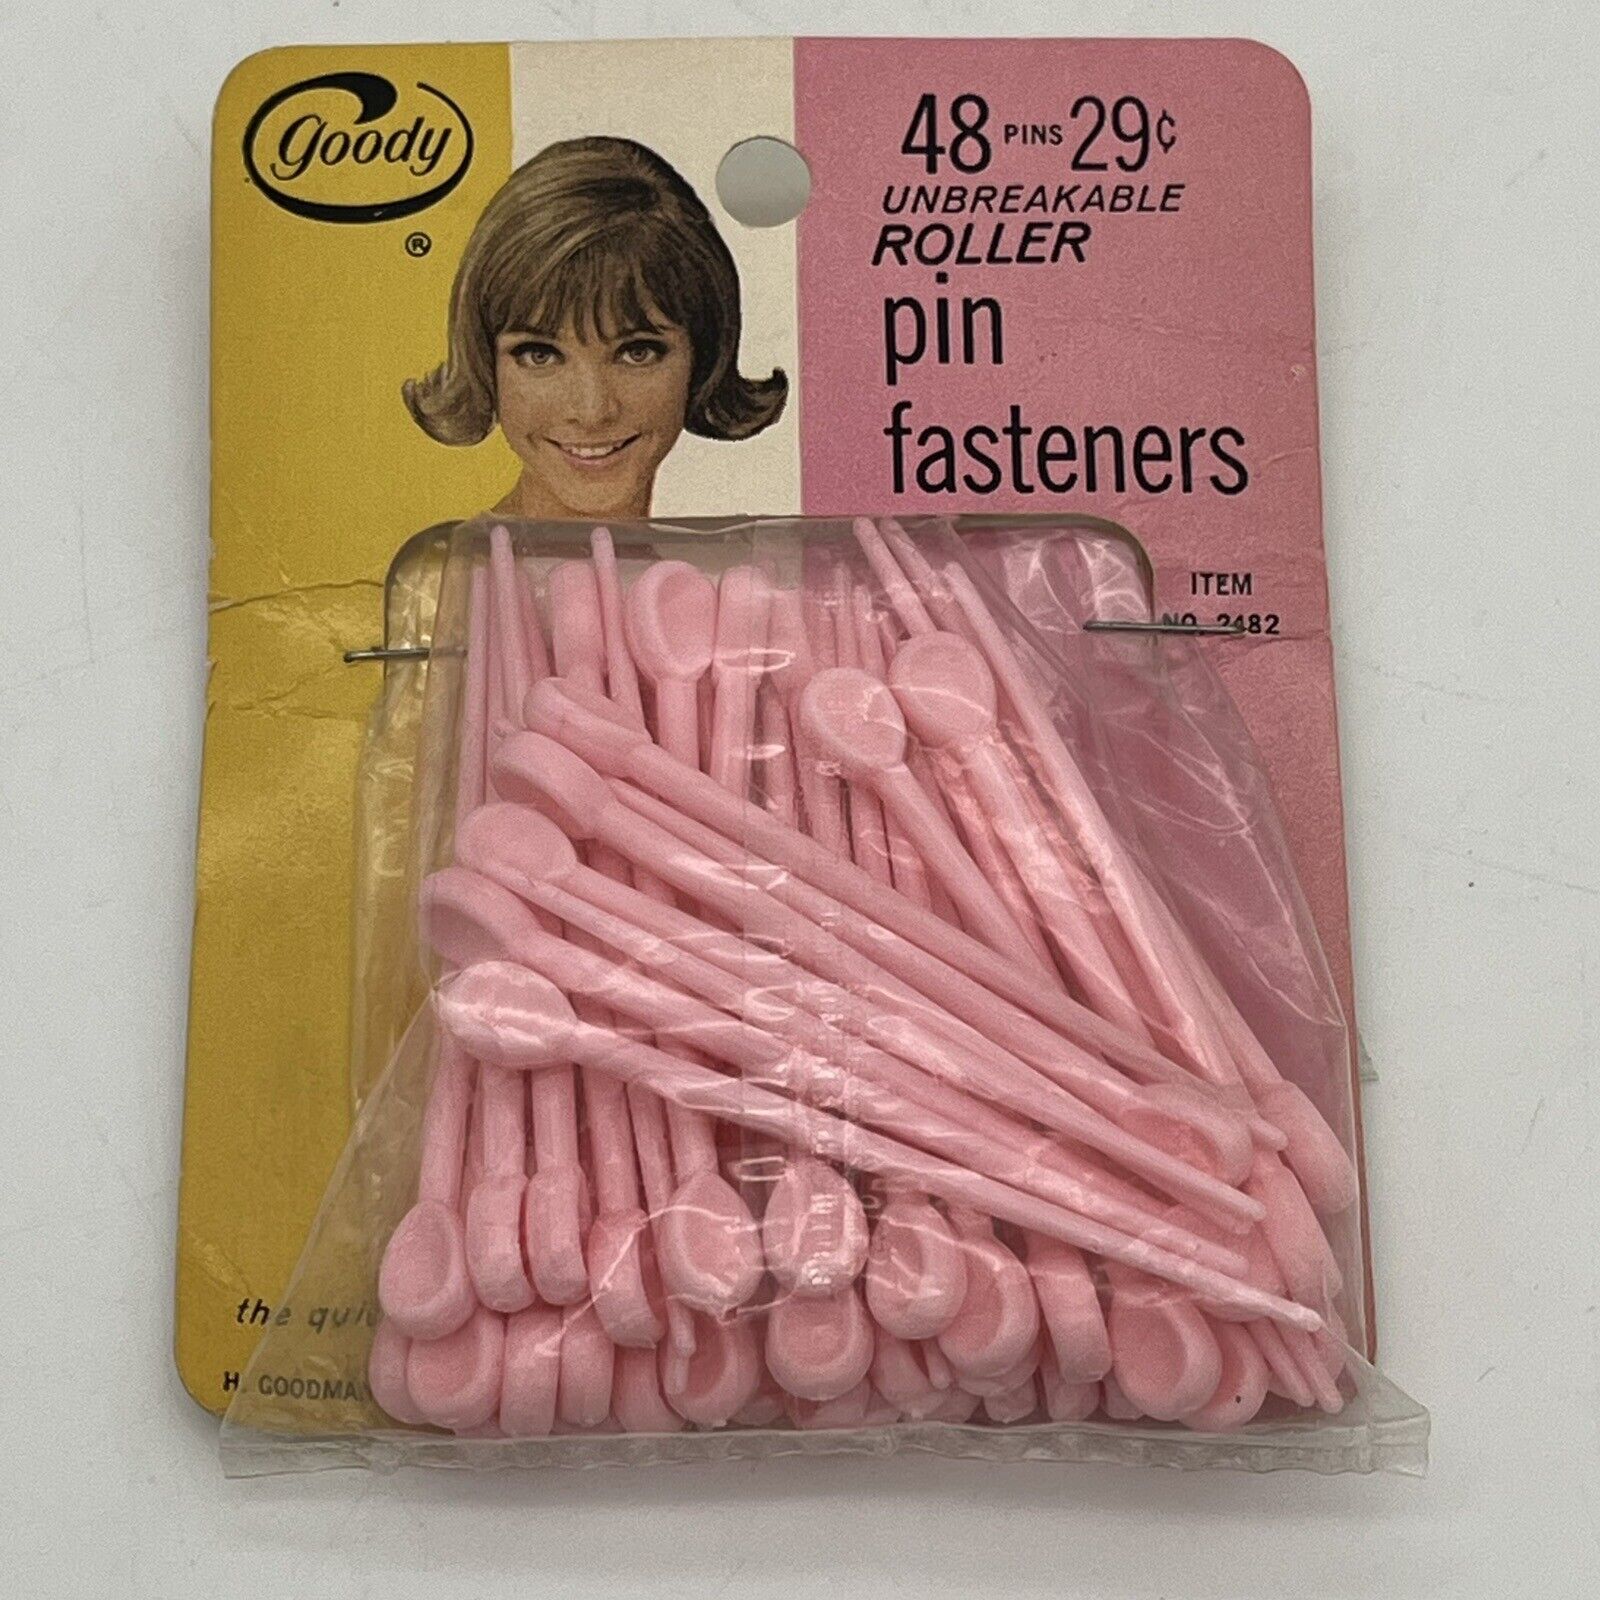 Vintage Goody Unbreakable Roller Pin Fasteners Pink 48 pins #2482 NOS New - $11.30